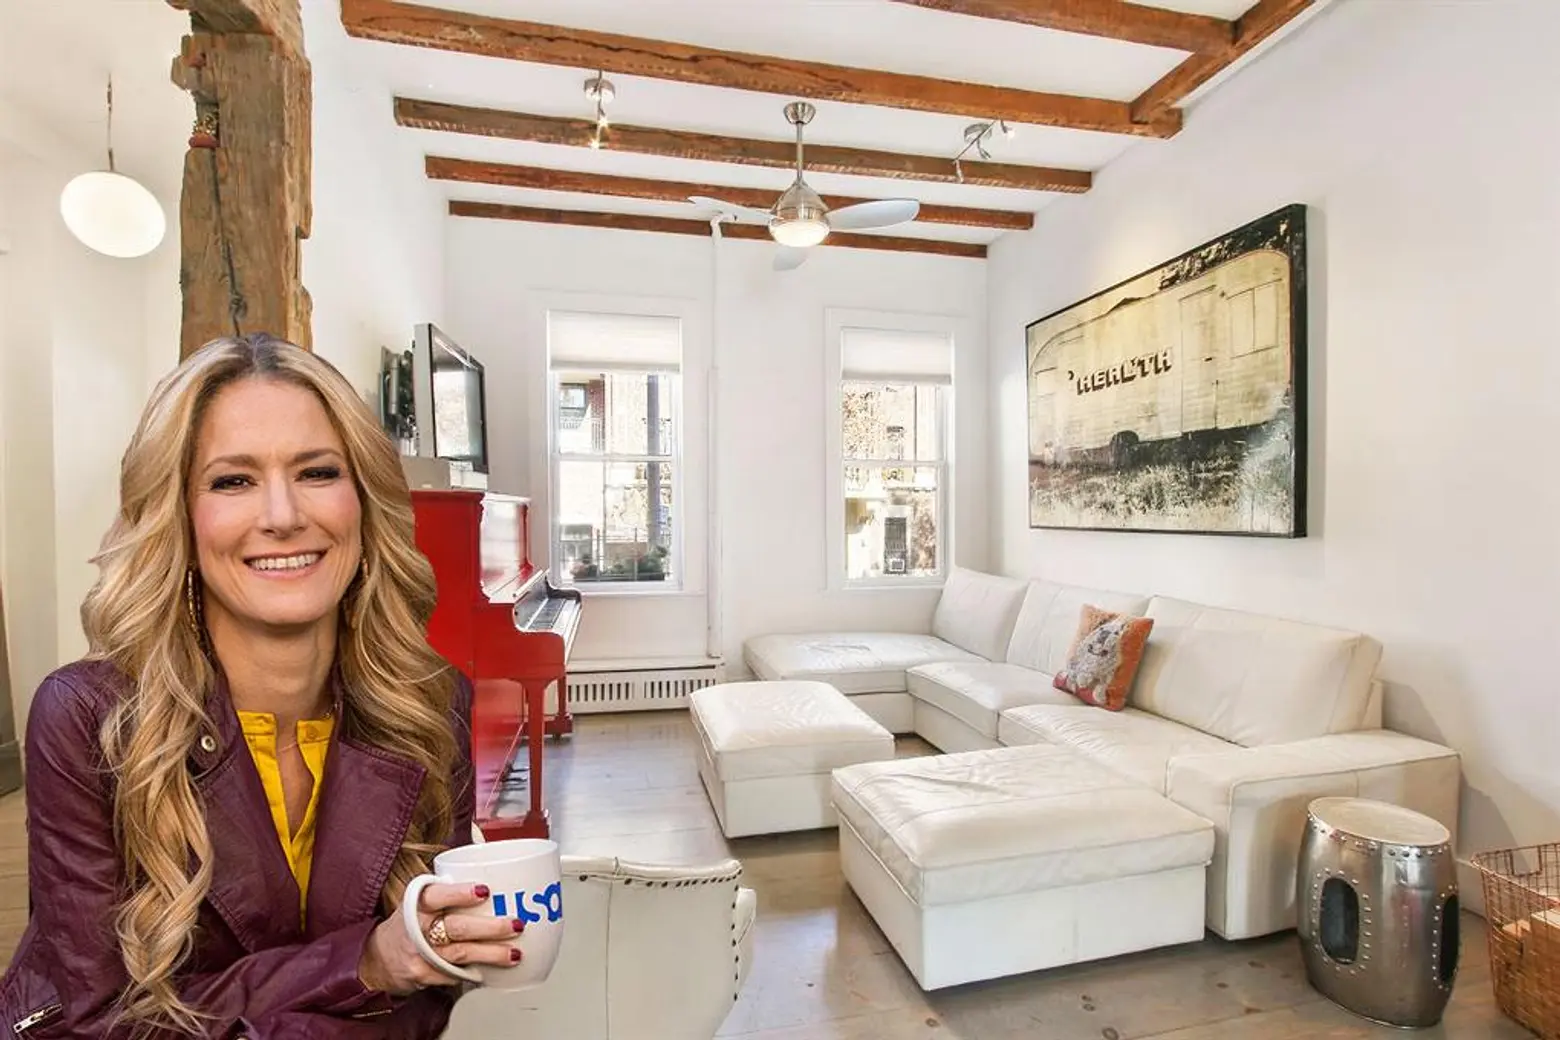 ‘Talk Stoop’ host Cat Greenleaf selling $3M Boerum Hill townhouse with reclaimed beams from a Catskills barn